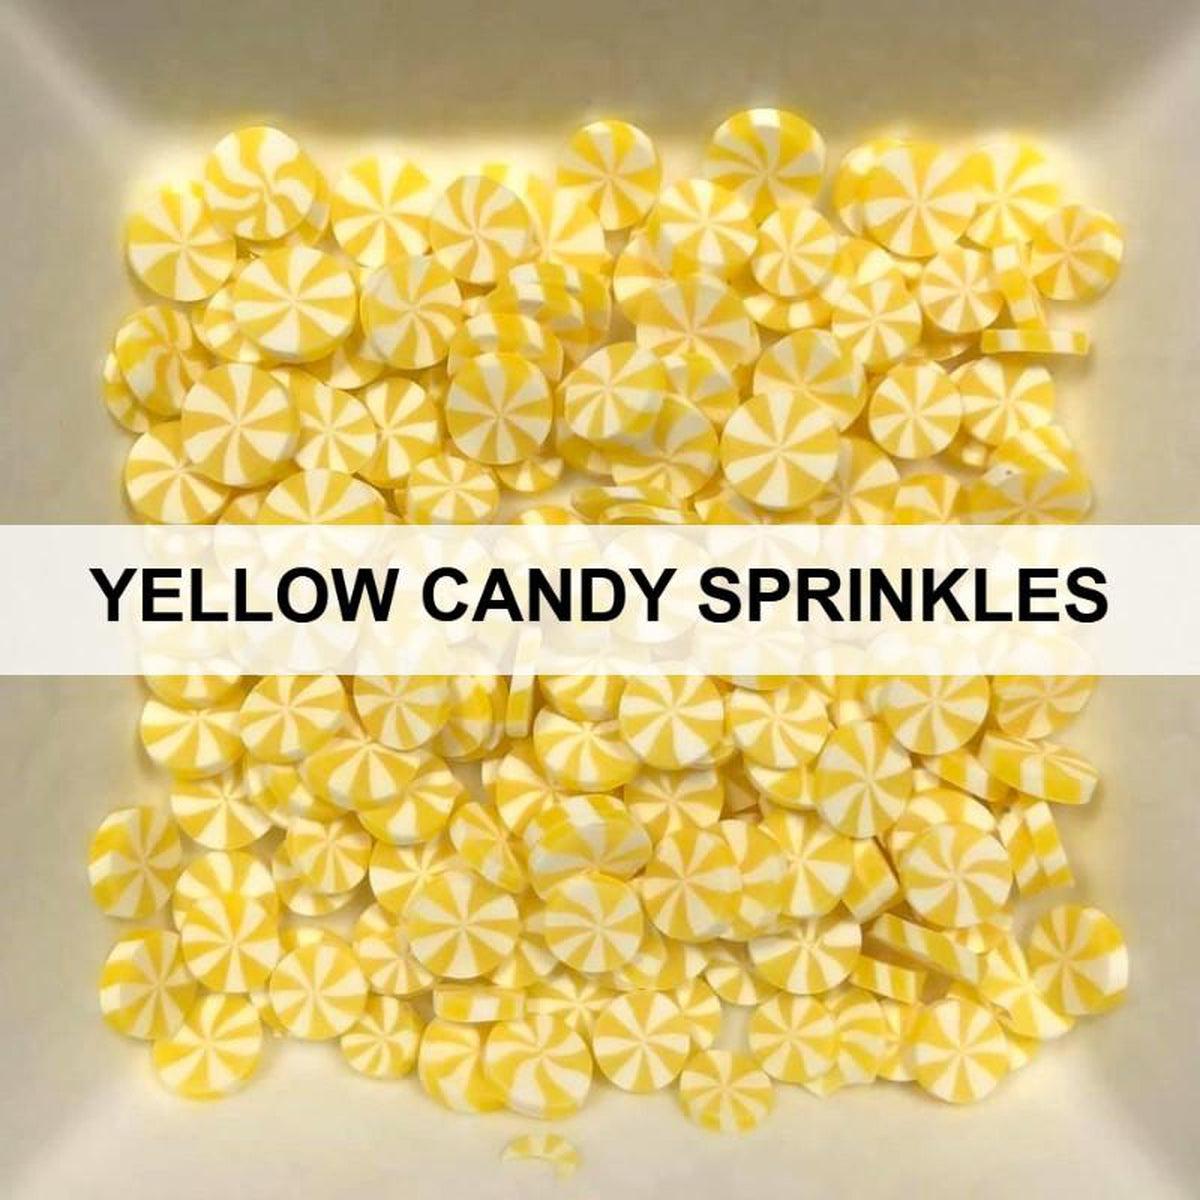 Yellow Candy Sprinkles by Kat Scrappiness - Kat Scrappiness